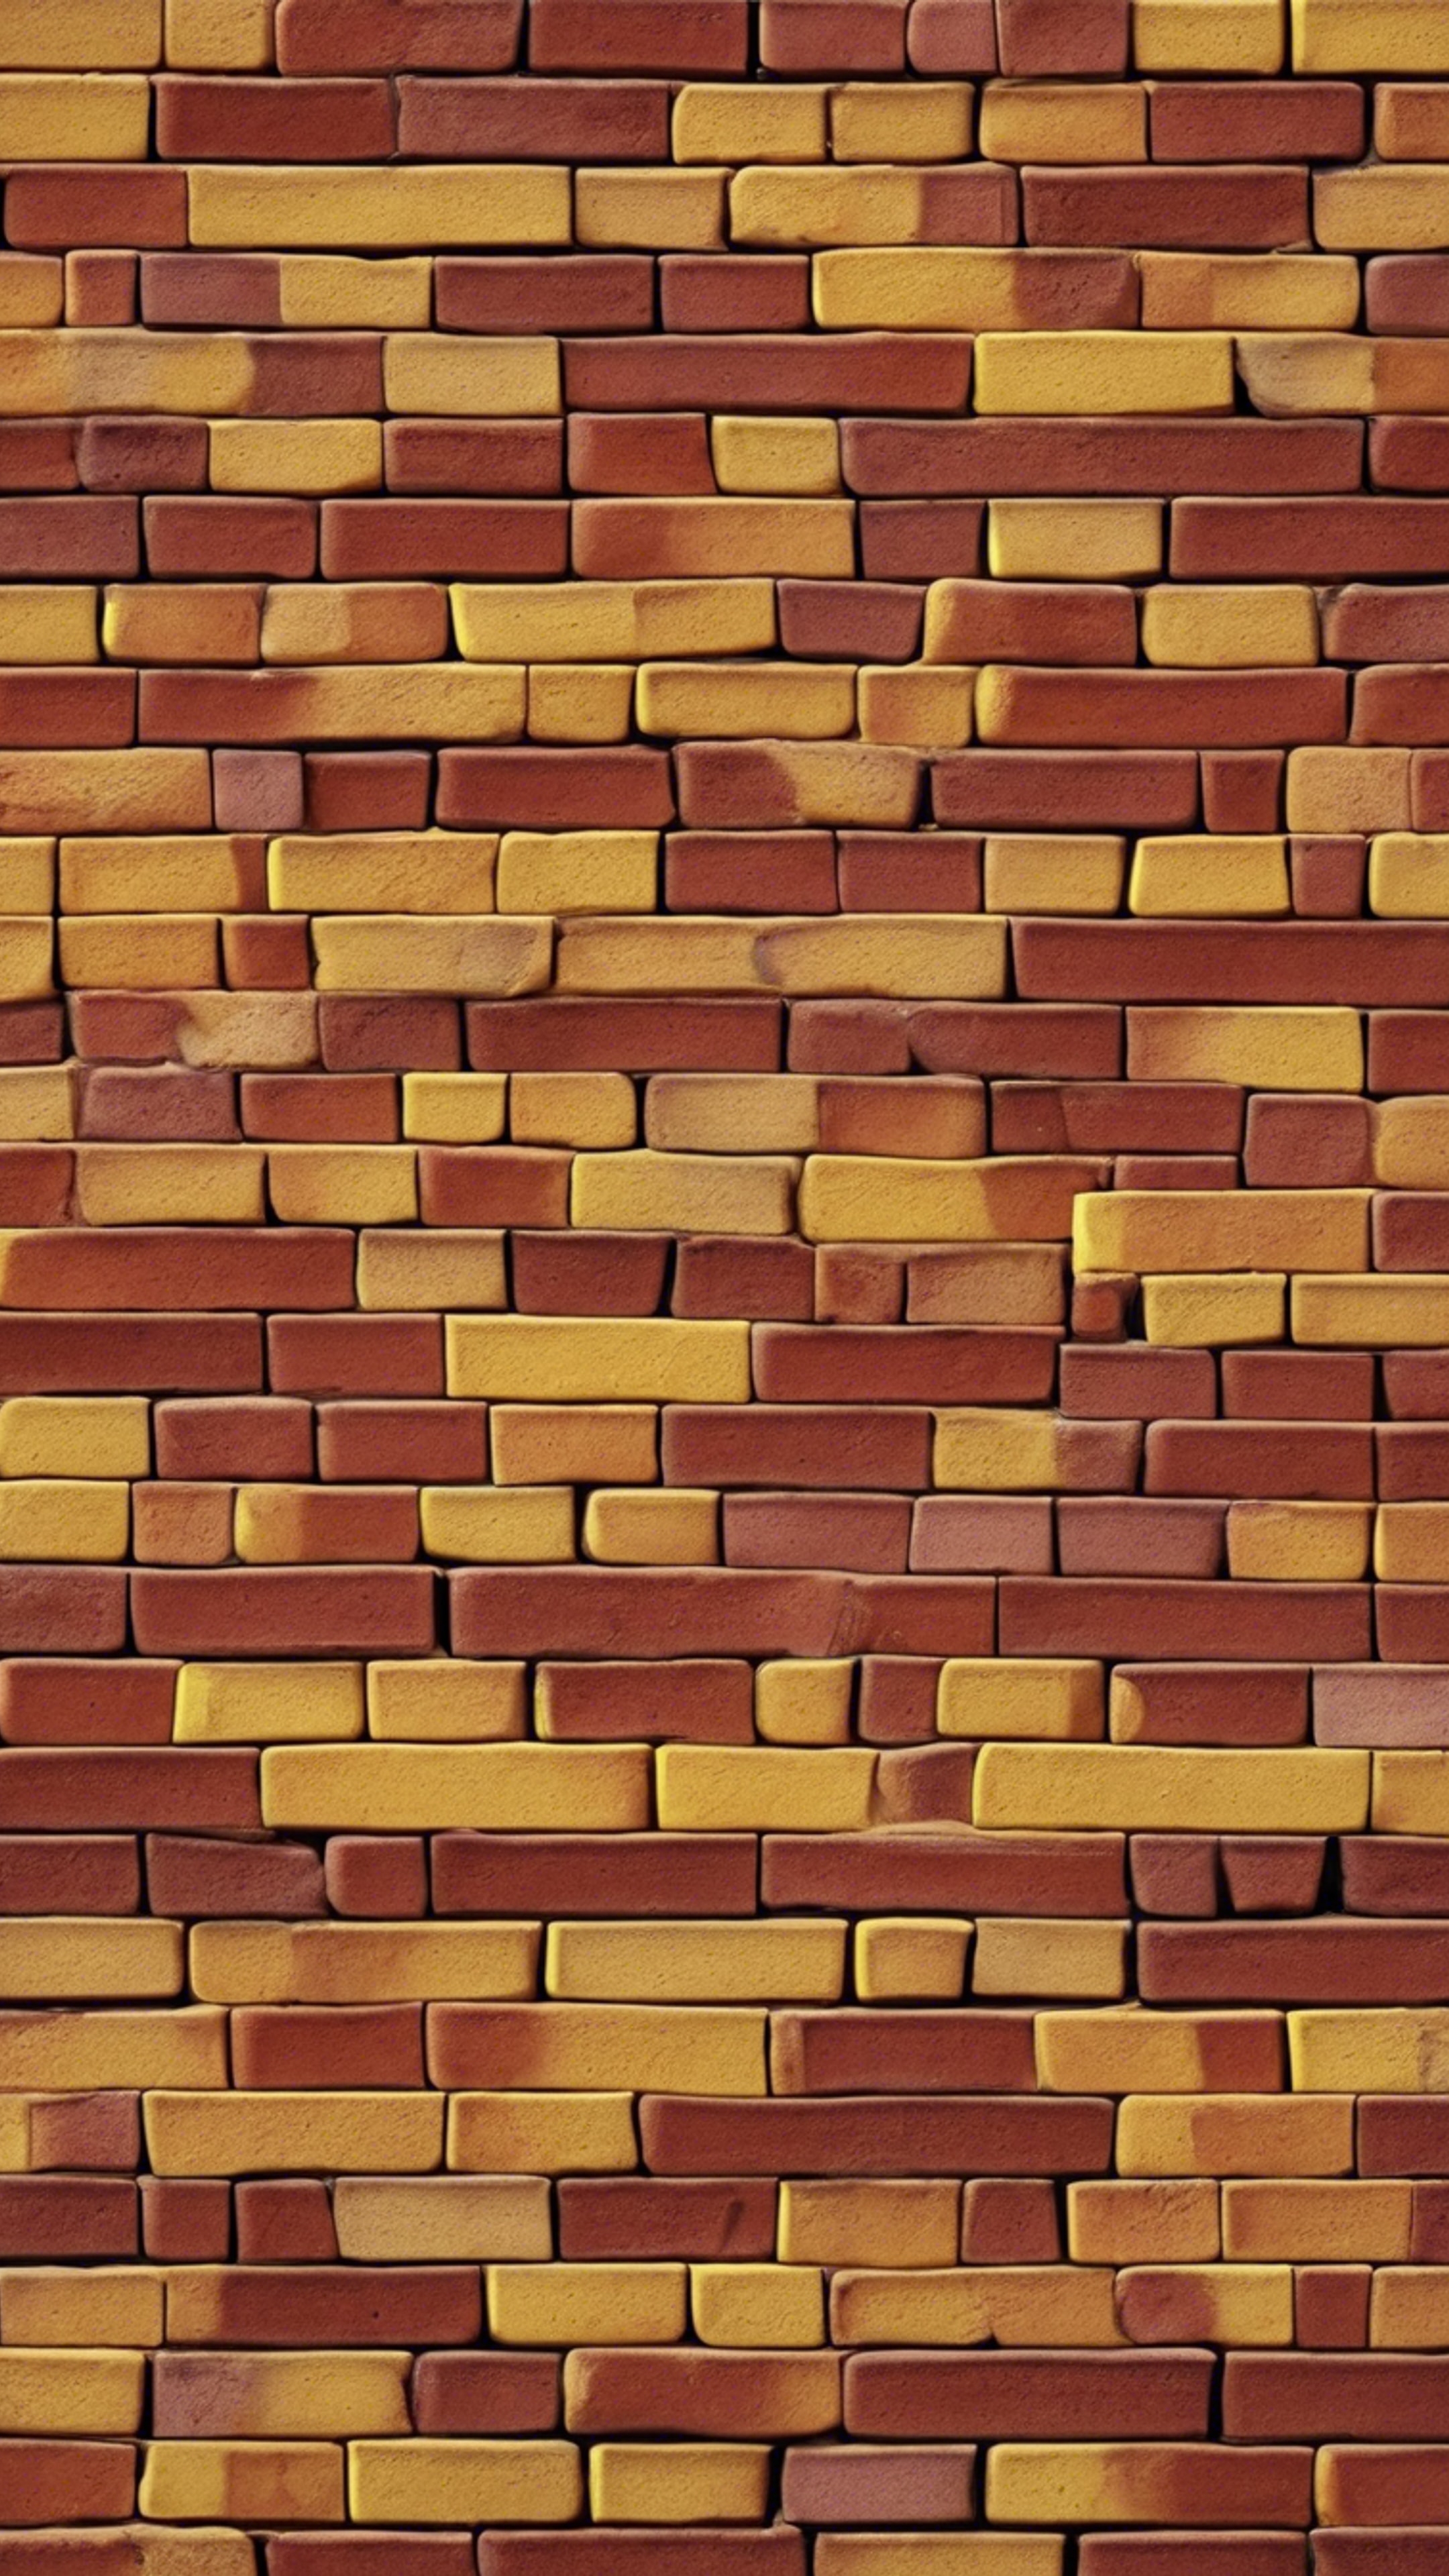 A tight close-up of a seamless, repeating pattern of red and yellow bricks.壁紙[1ac961dc3db44015ab94]